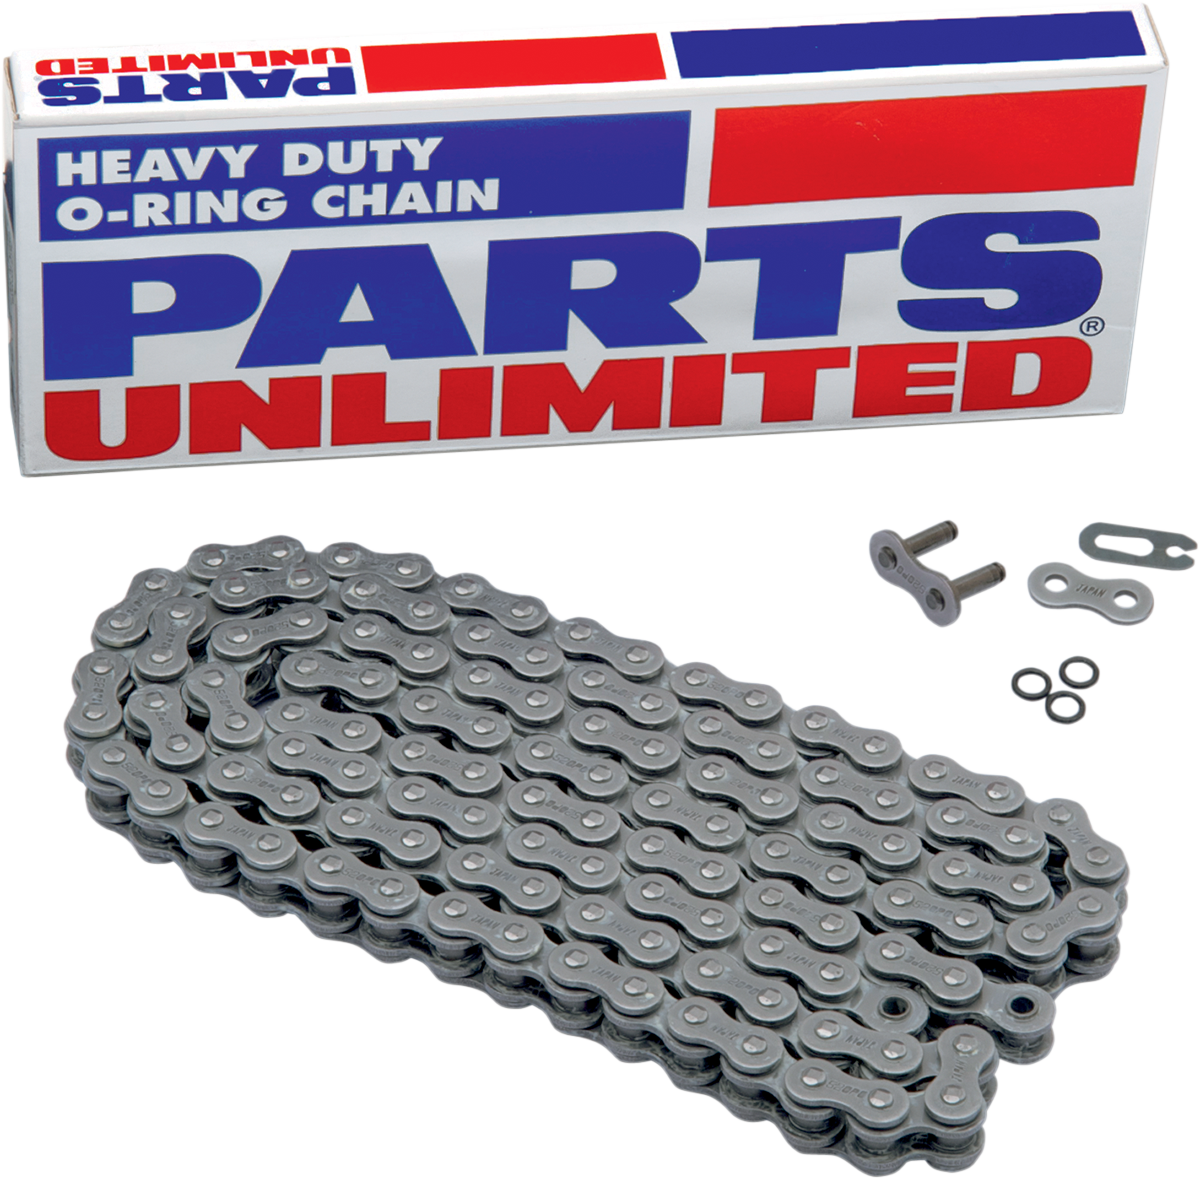 PARTS UNLIMITED-CHAIN MOTORCYCLE CHAIN CHAIN PU 525 O-RNG X 108L